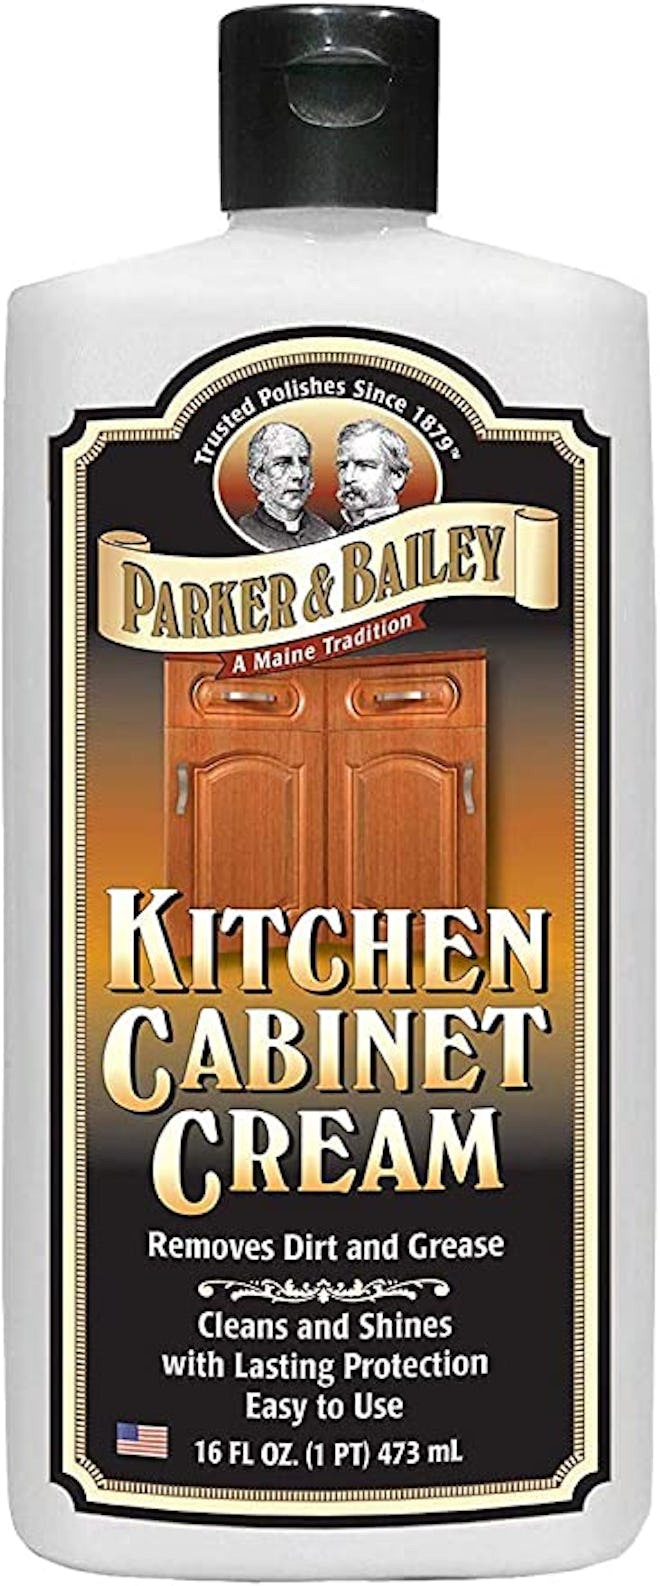 Parker and Bailey Kitchen Cabinet Cream